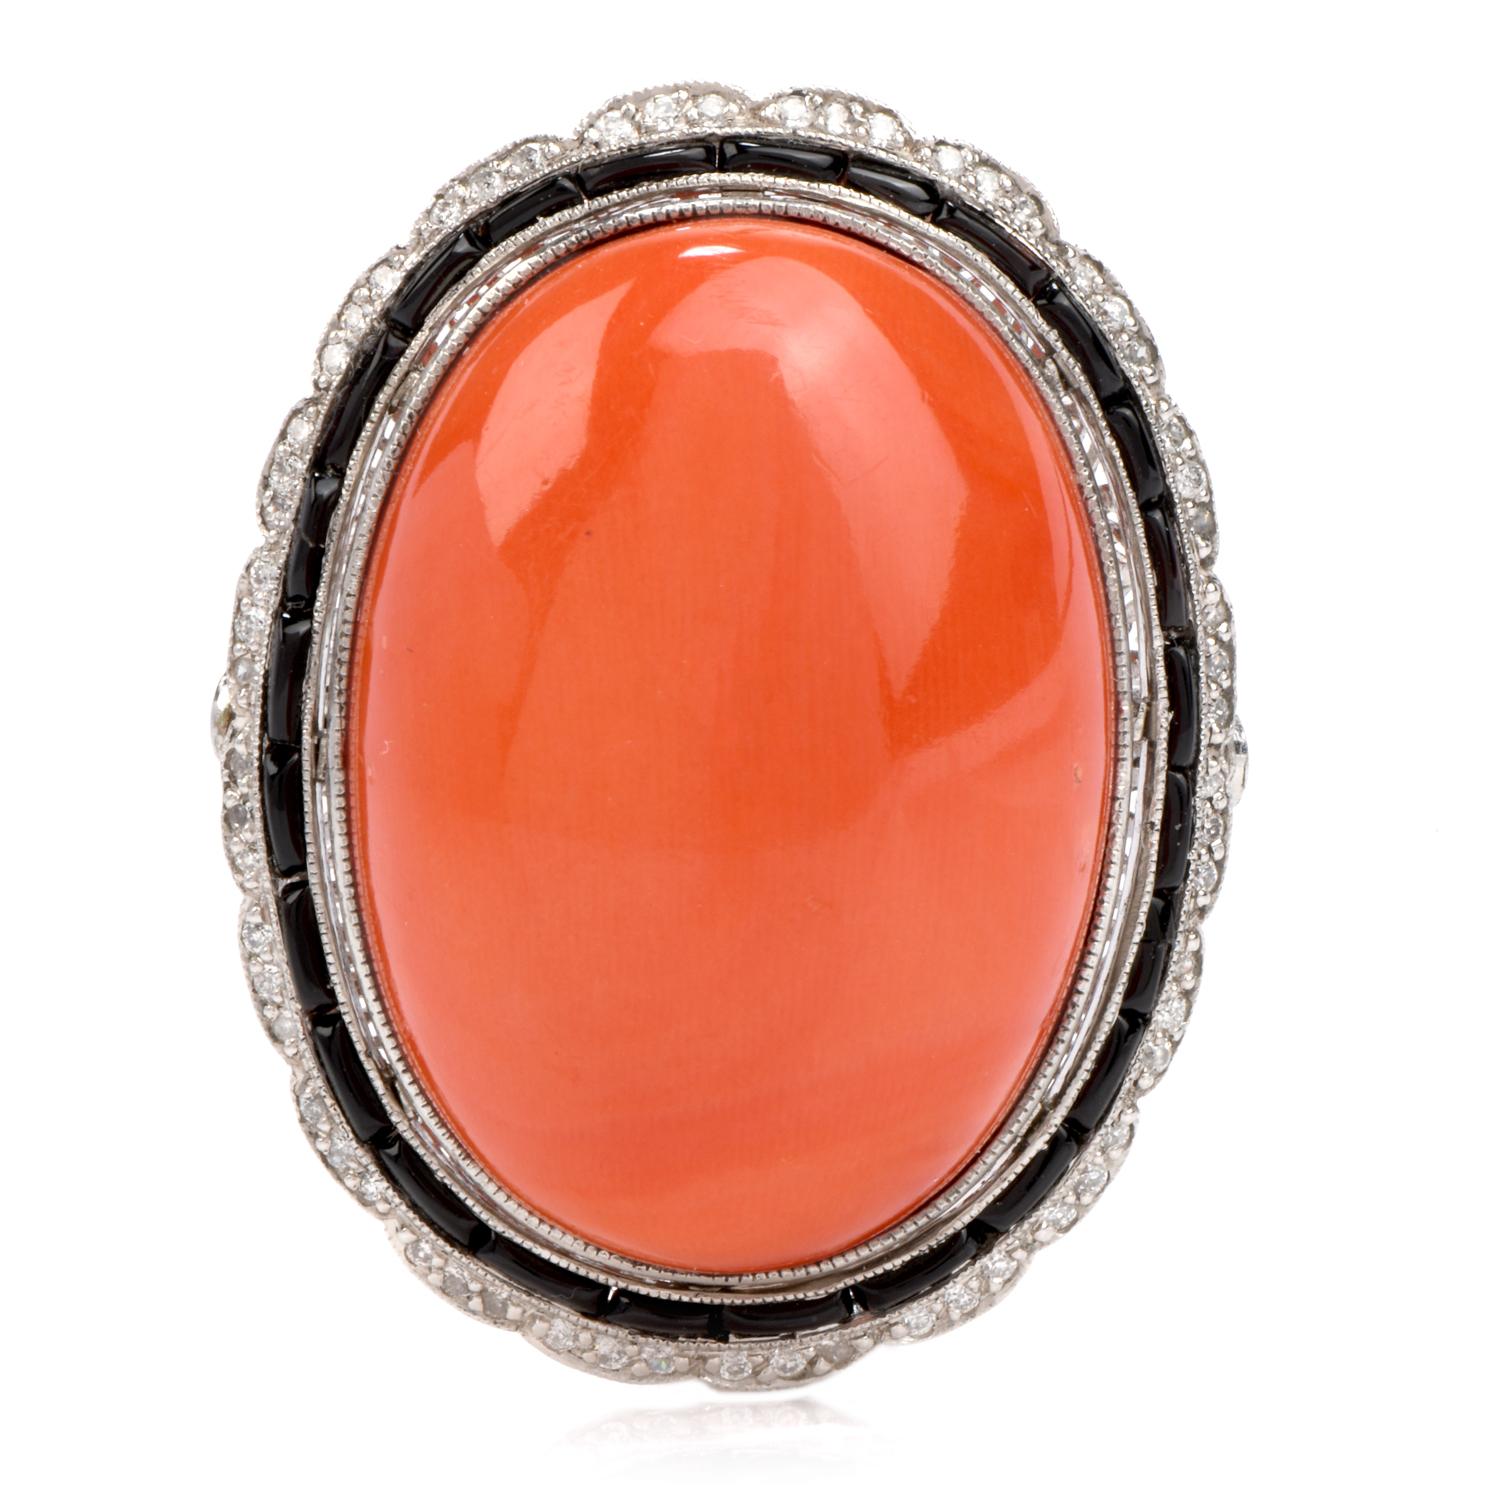 You’ll become a lover of marine life as you set your eyes on this

Very large natural Coral cocktail ring. Adorning the center of

This immaculately handmade platinum ring is one large oval shaped natural salmon red Coral measuring

Appx. 17.62 x